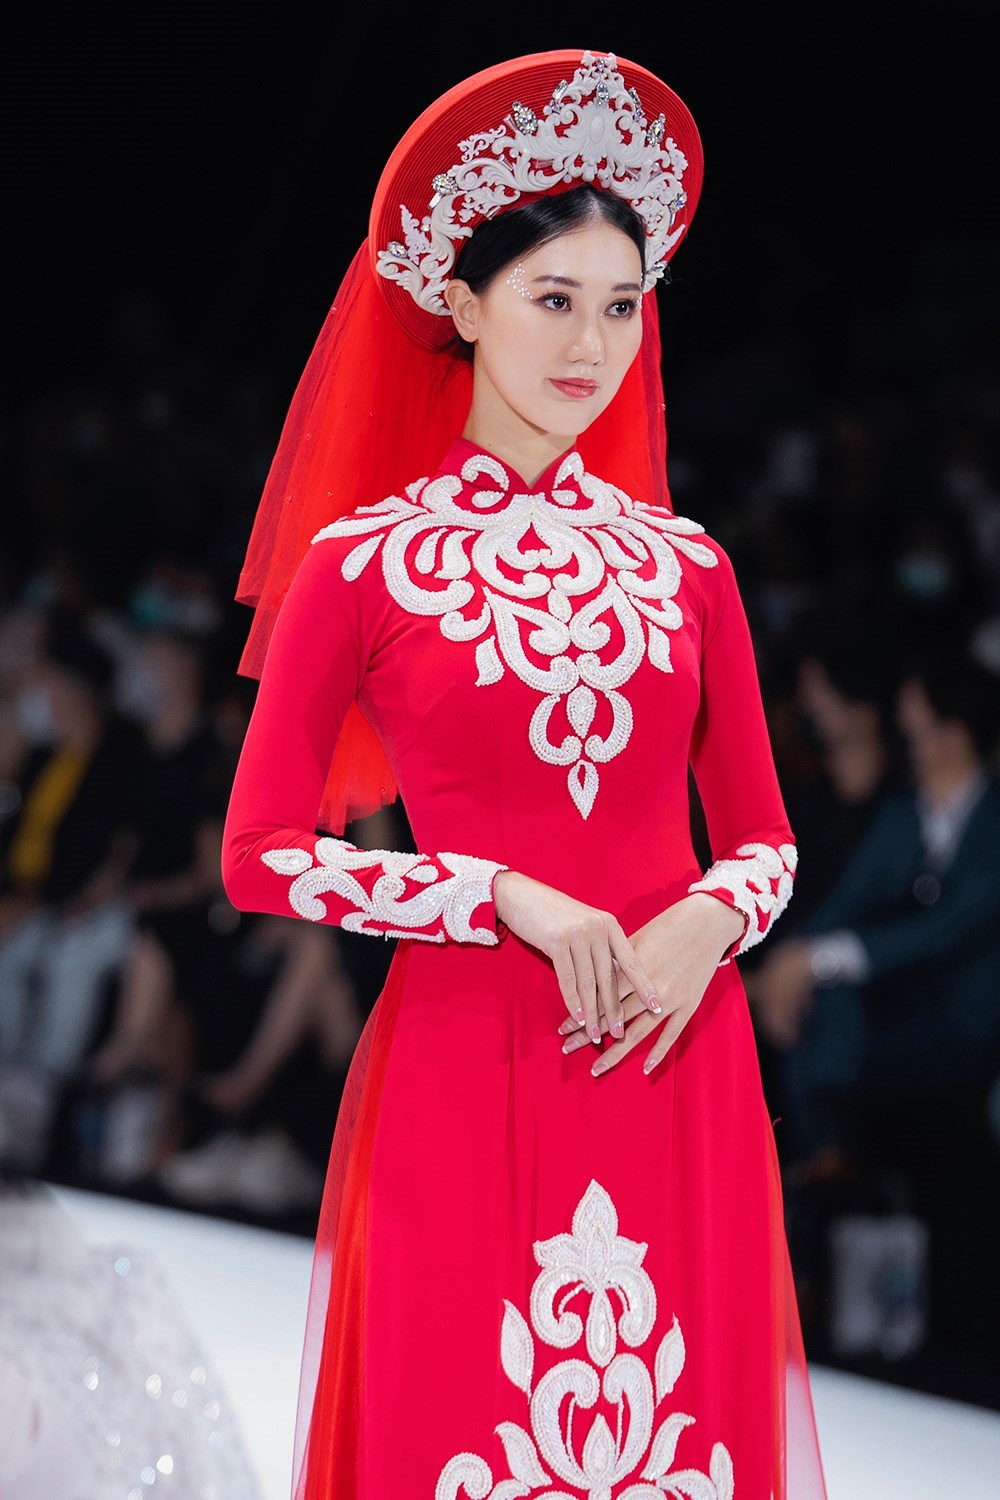 Kim Lang - une collection d'ao dai brodee a la main delicate et impressionnante hinh anh 4